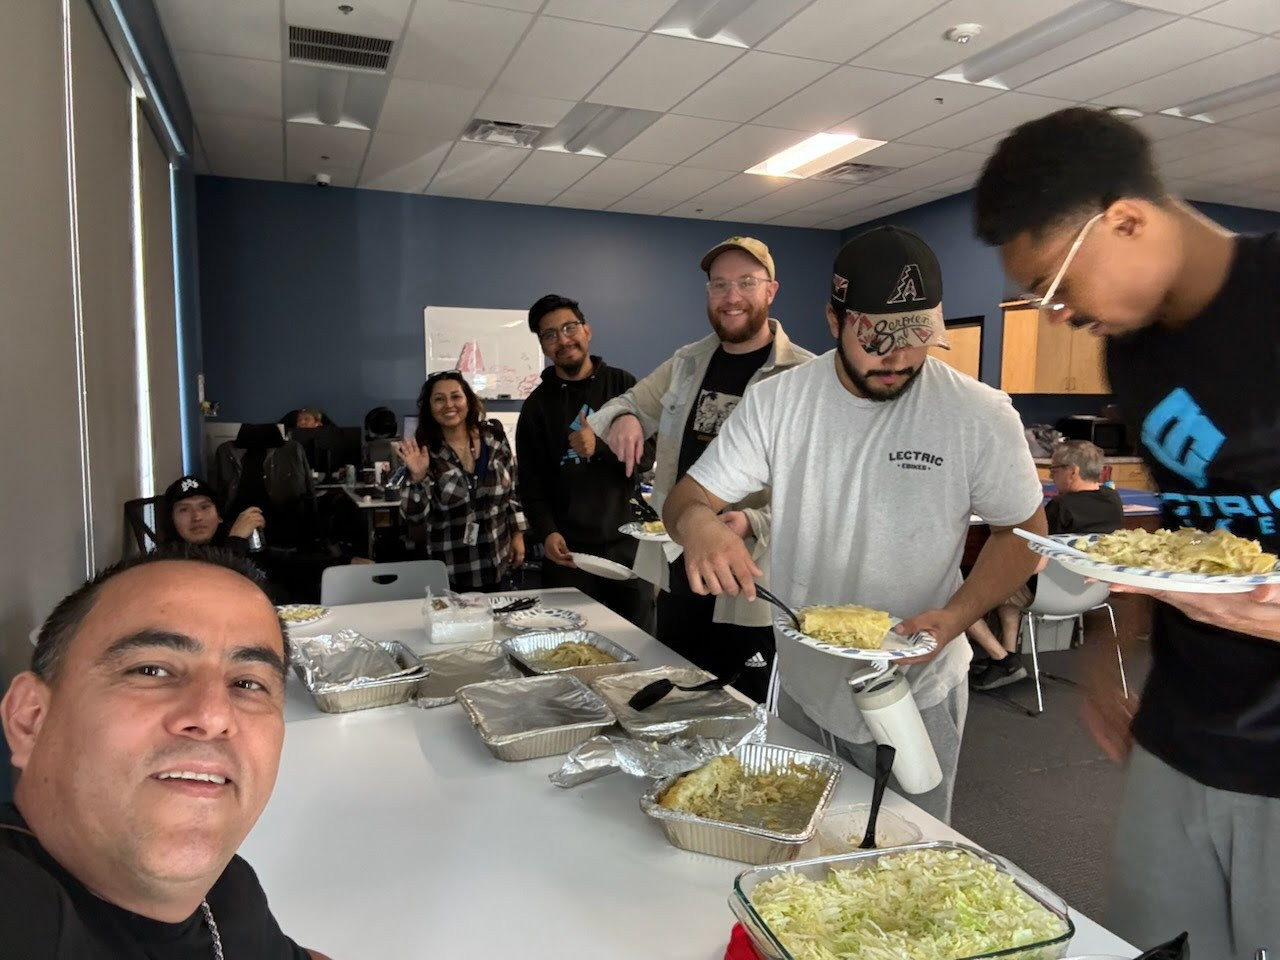 Our warehouse team having their weekly catered lunc